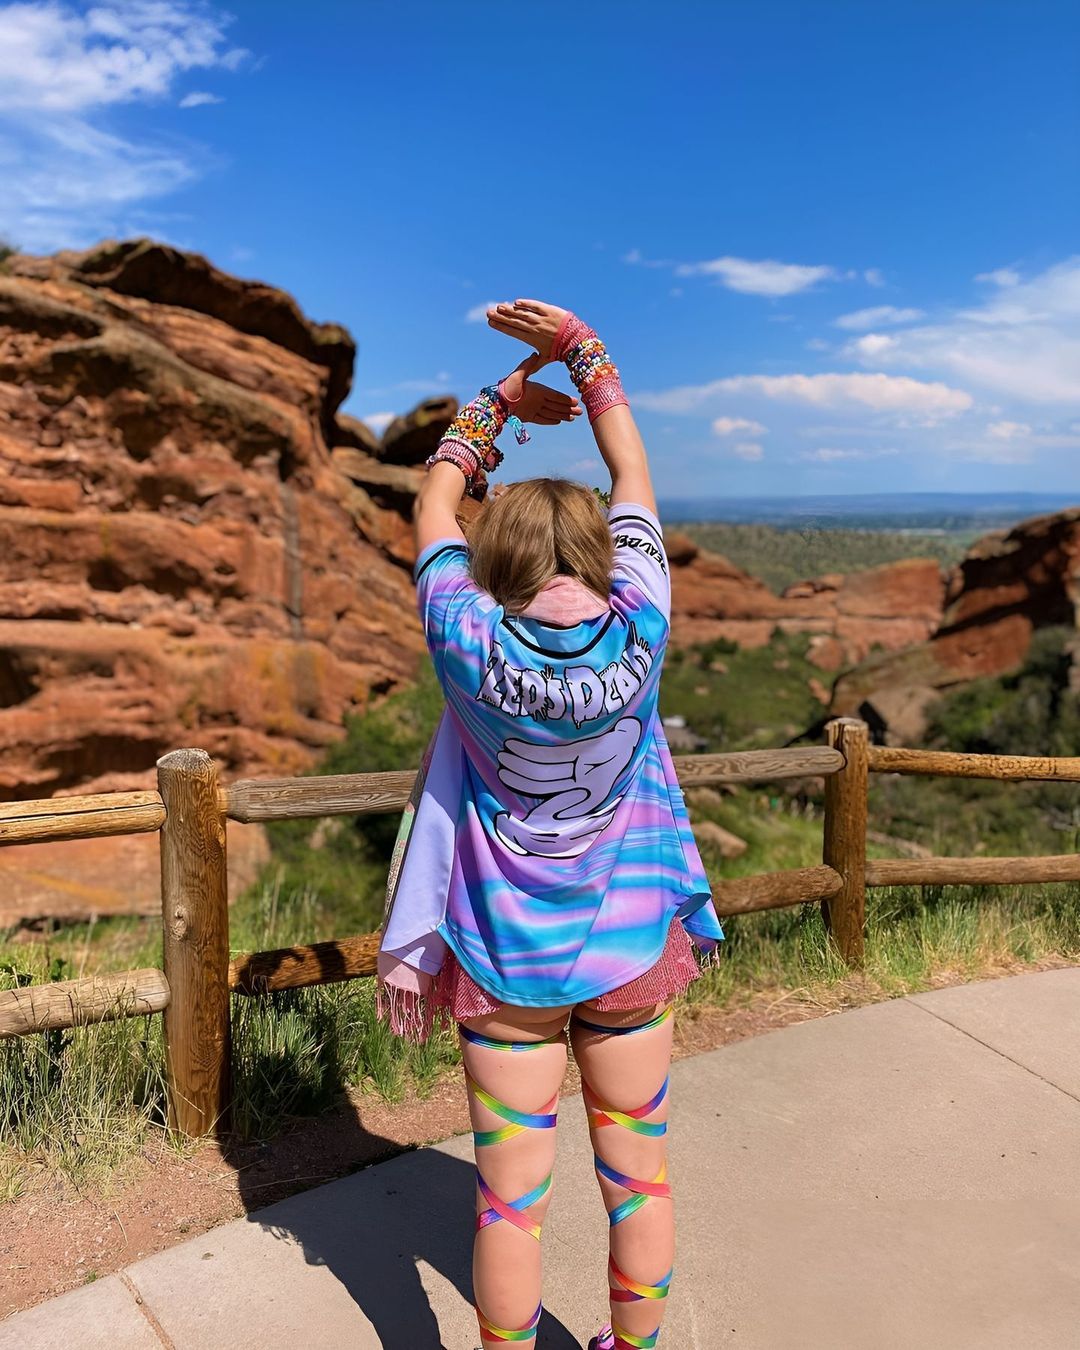 A girl in a colorful shirt jersey standing in front of a mountain.